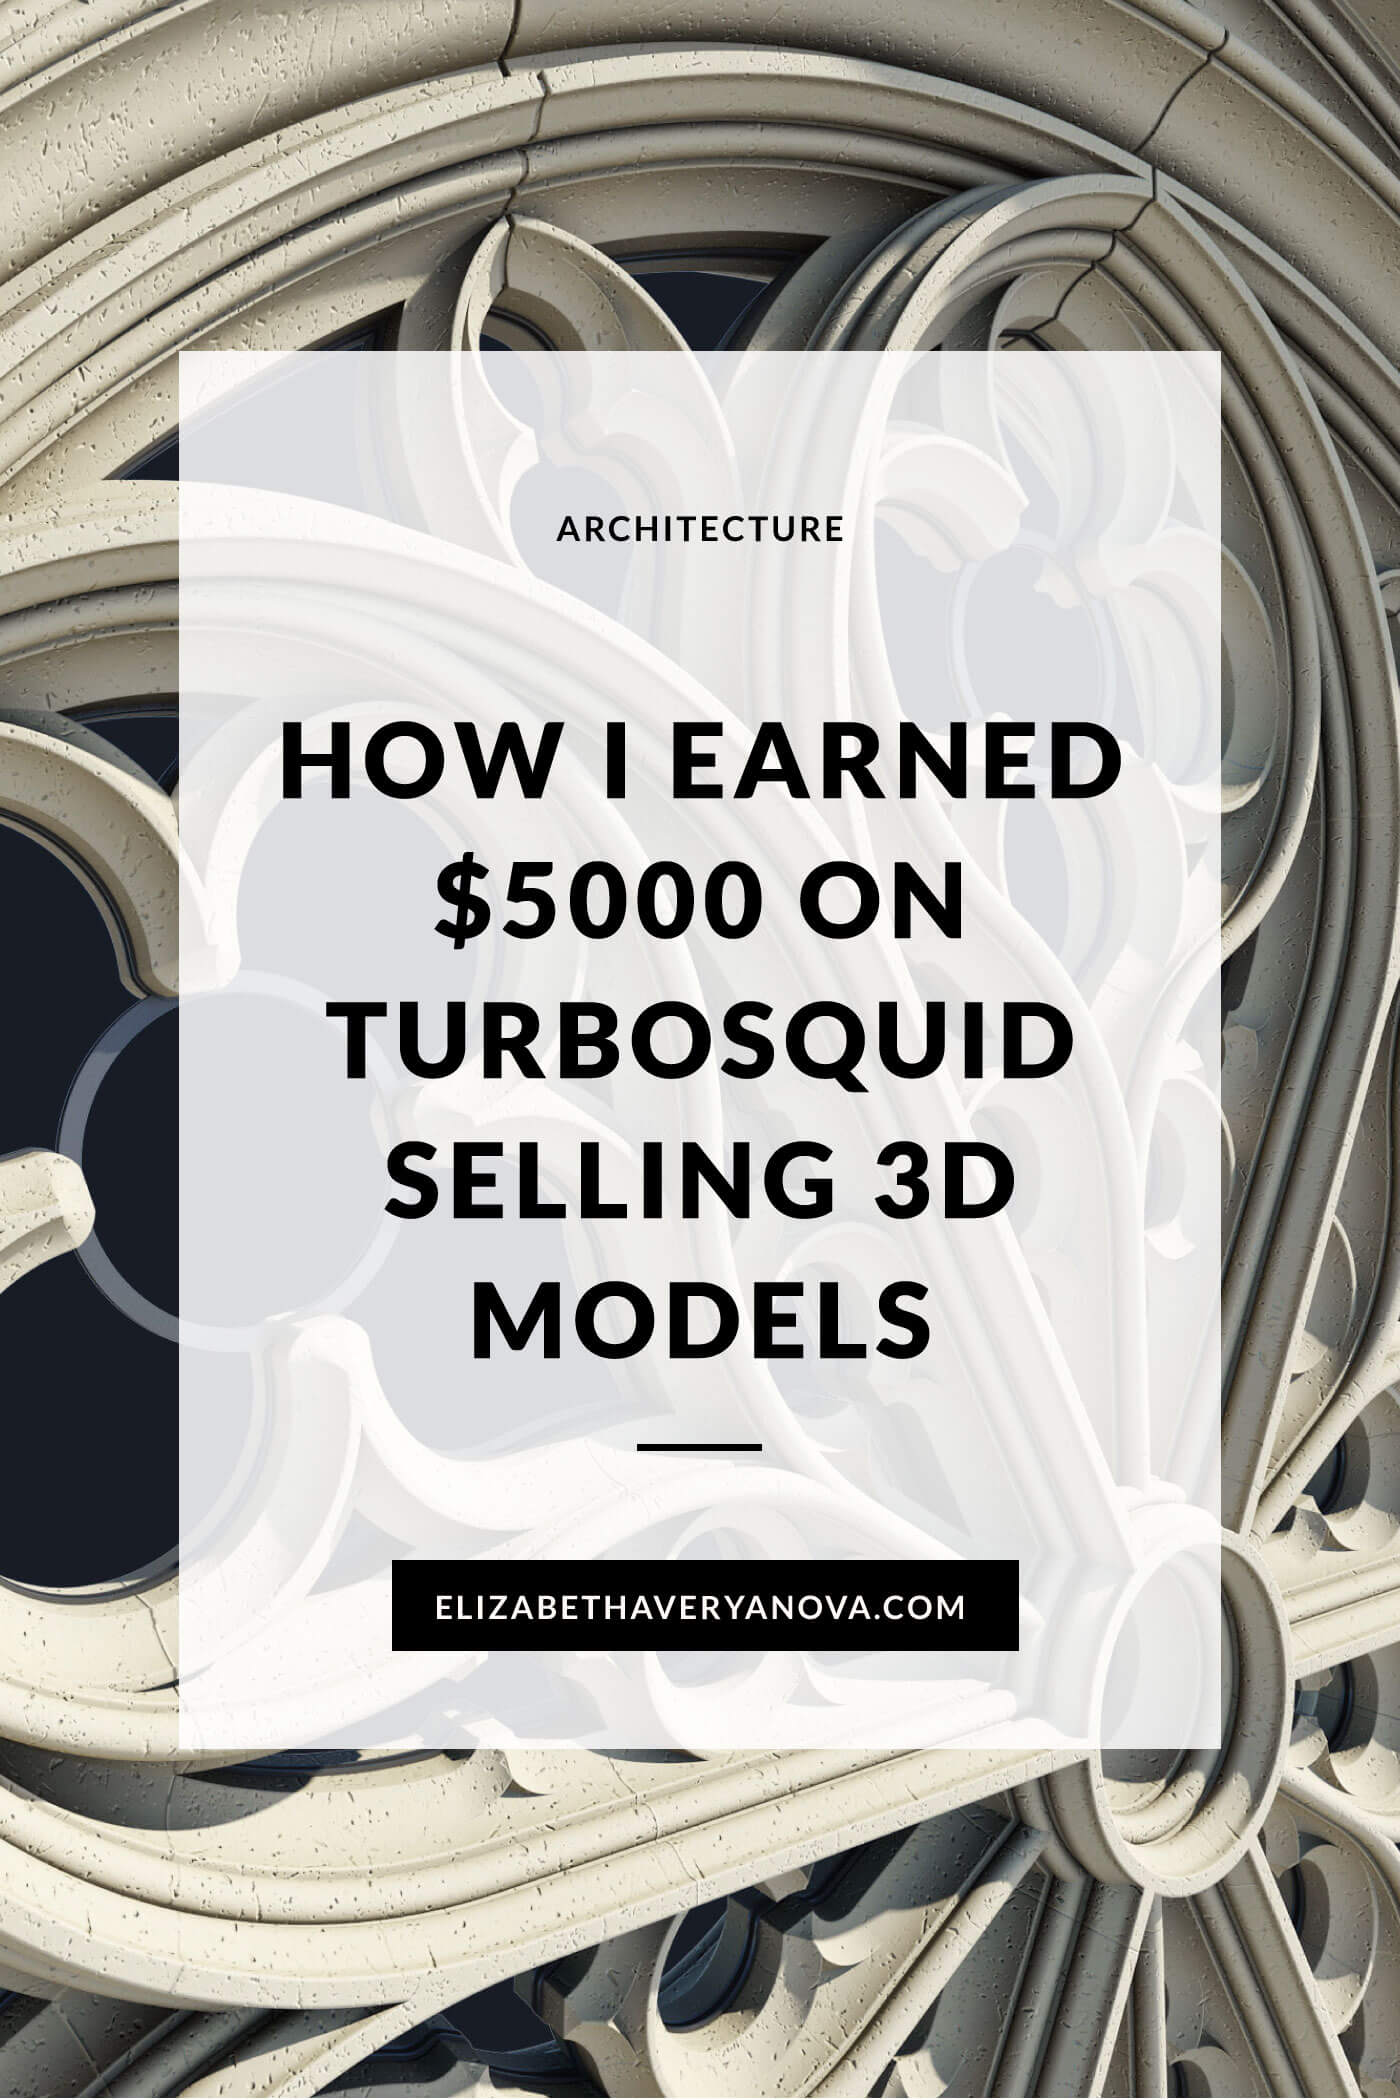 How I Earned $5000 on Turbosquid Selling 3D Models